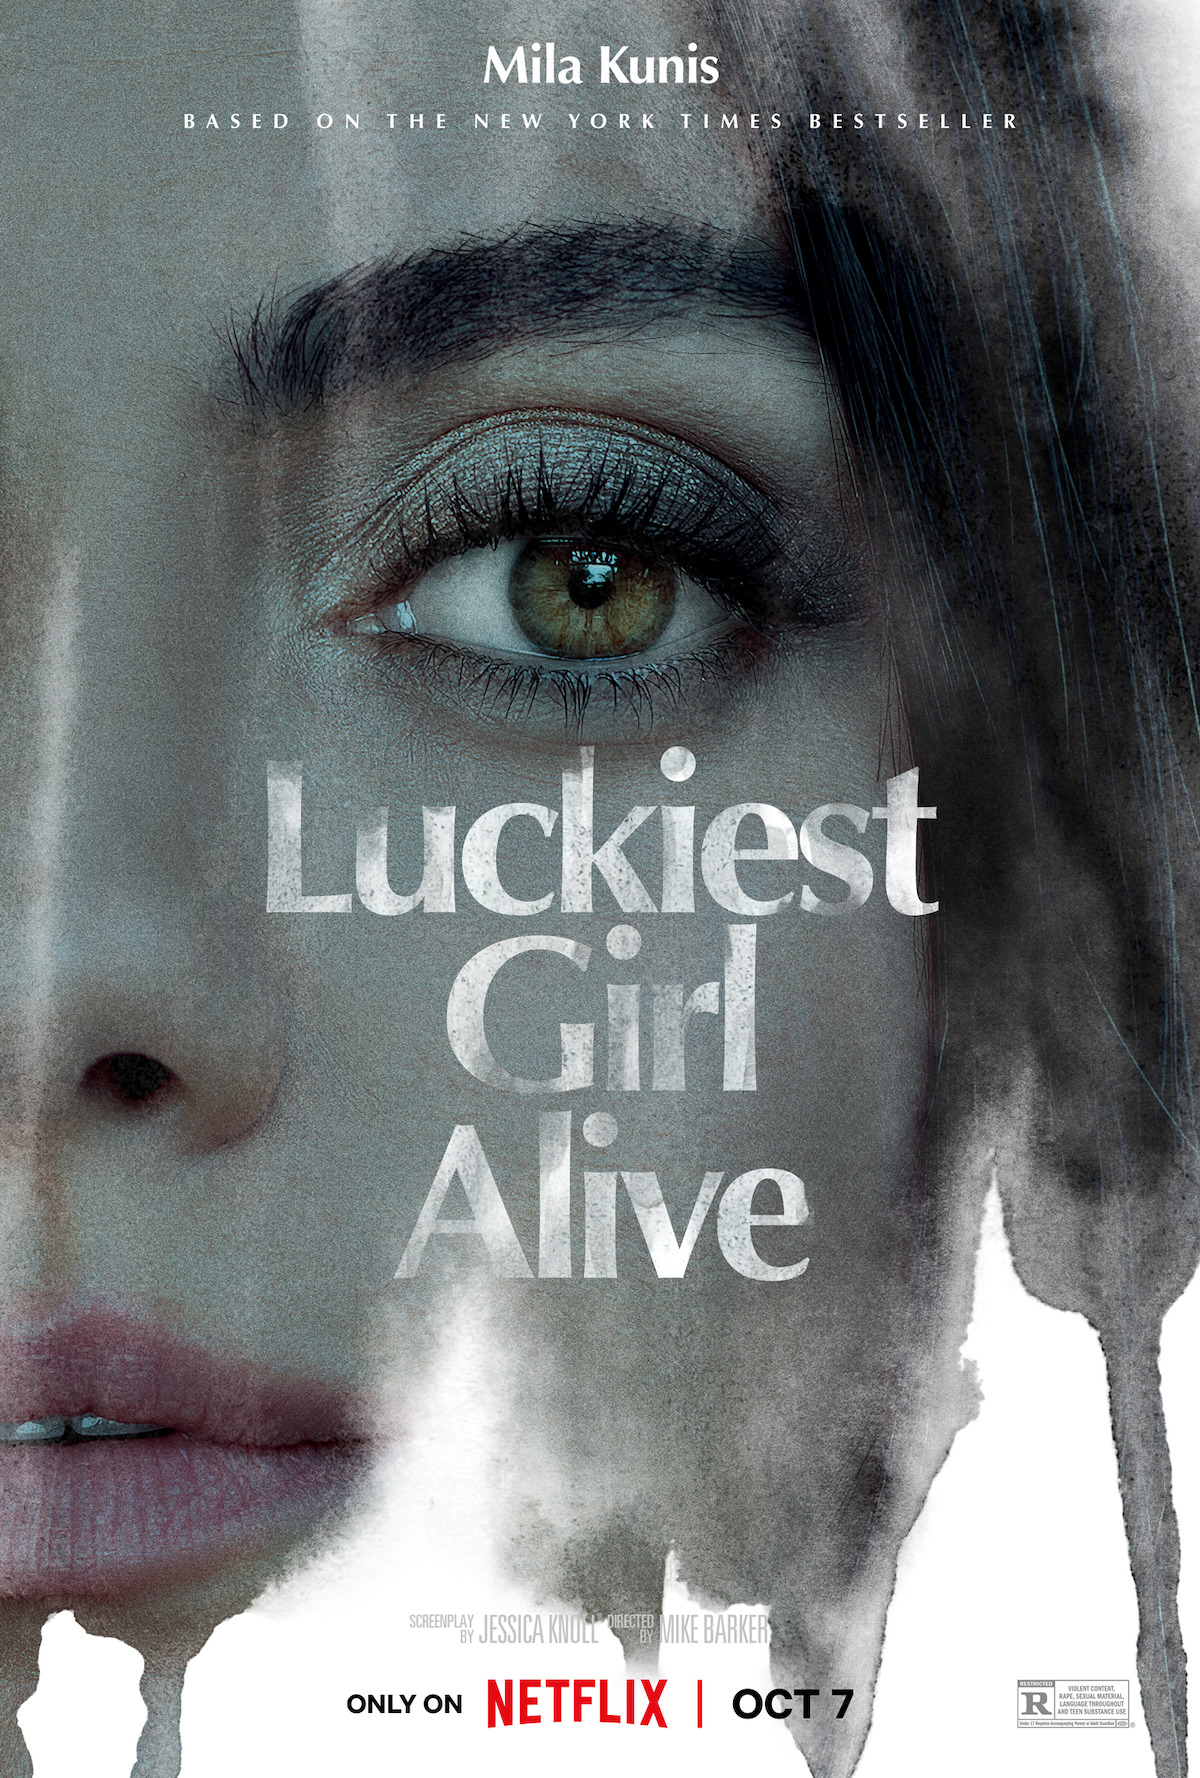 Luckiest Girl Alive Trailer and First Look Photos Dropped photo